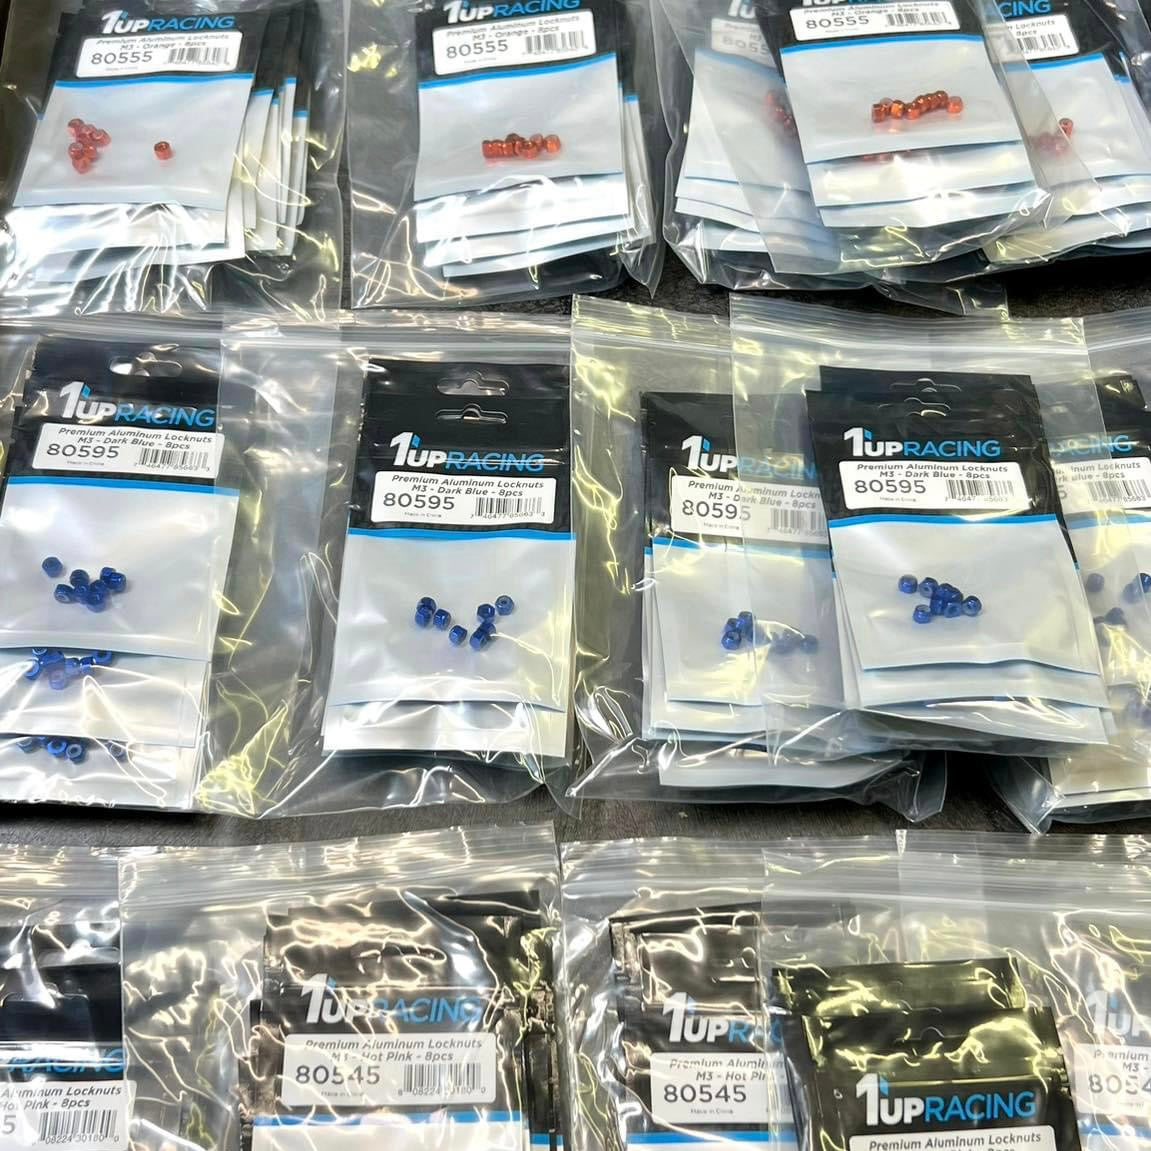 Aluminum Shims and Locknuts Restocked Plus 10% off your order today!